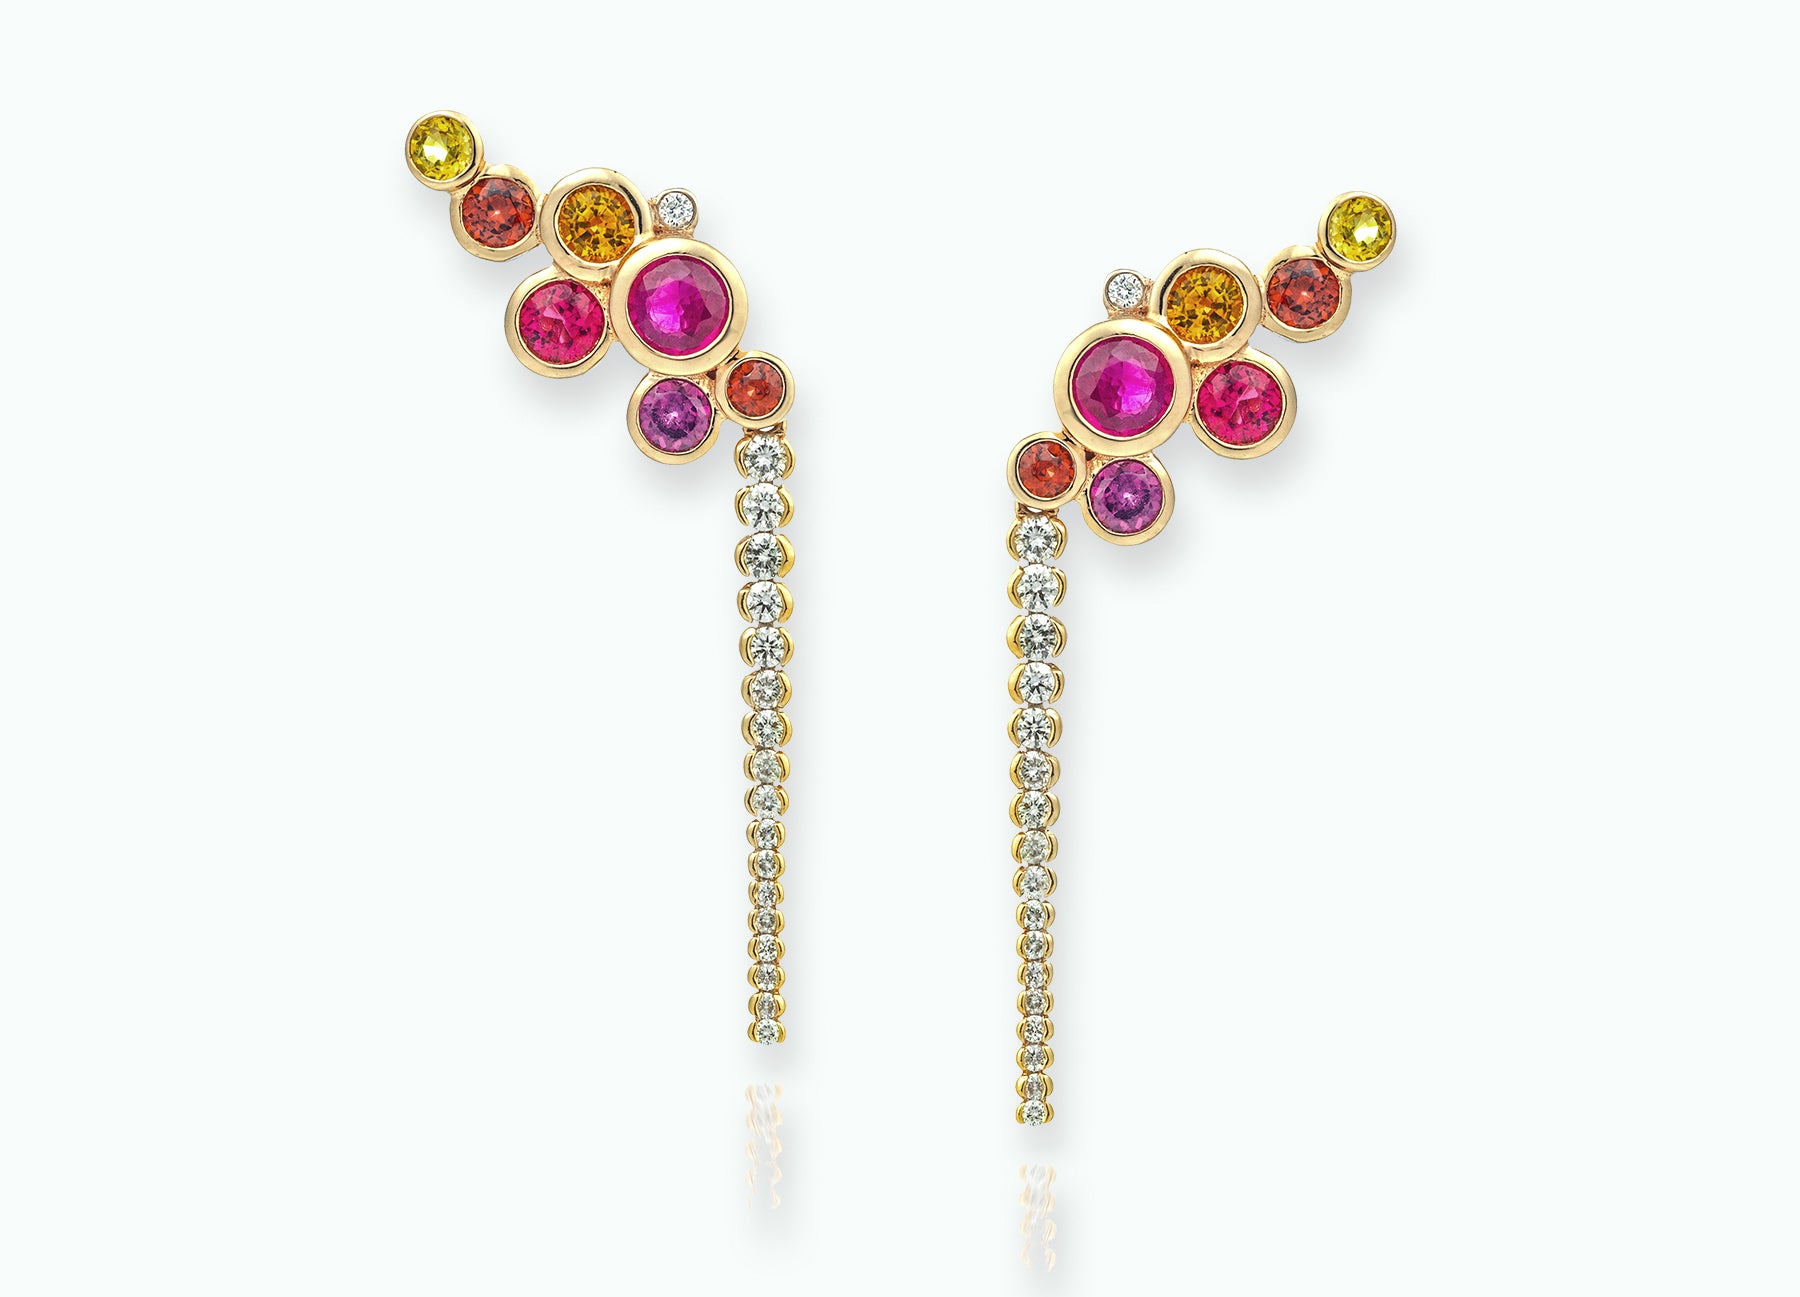 RUBY BUBBLE EARRINGS WITH WHITE DIAMOND EXTENSION DROPS